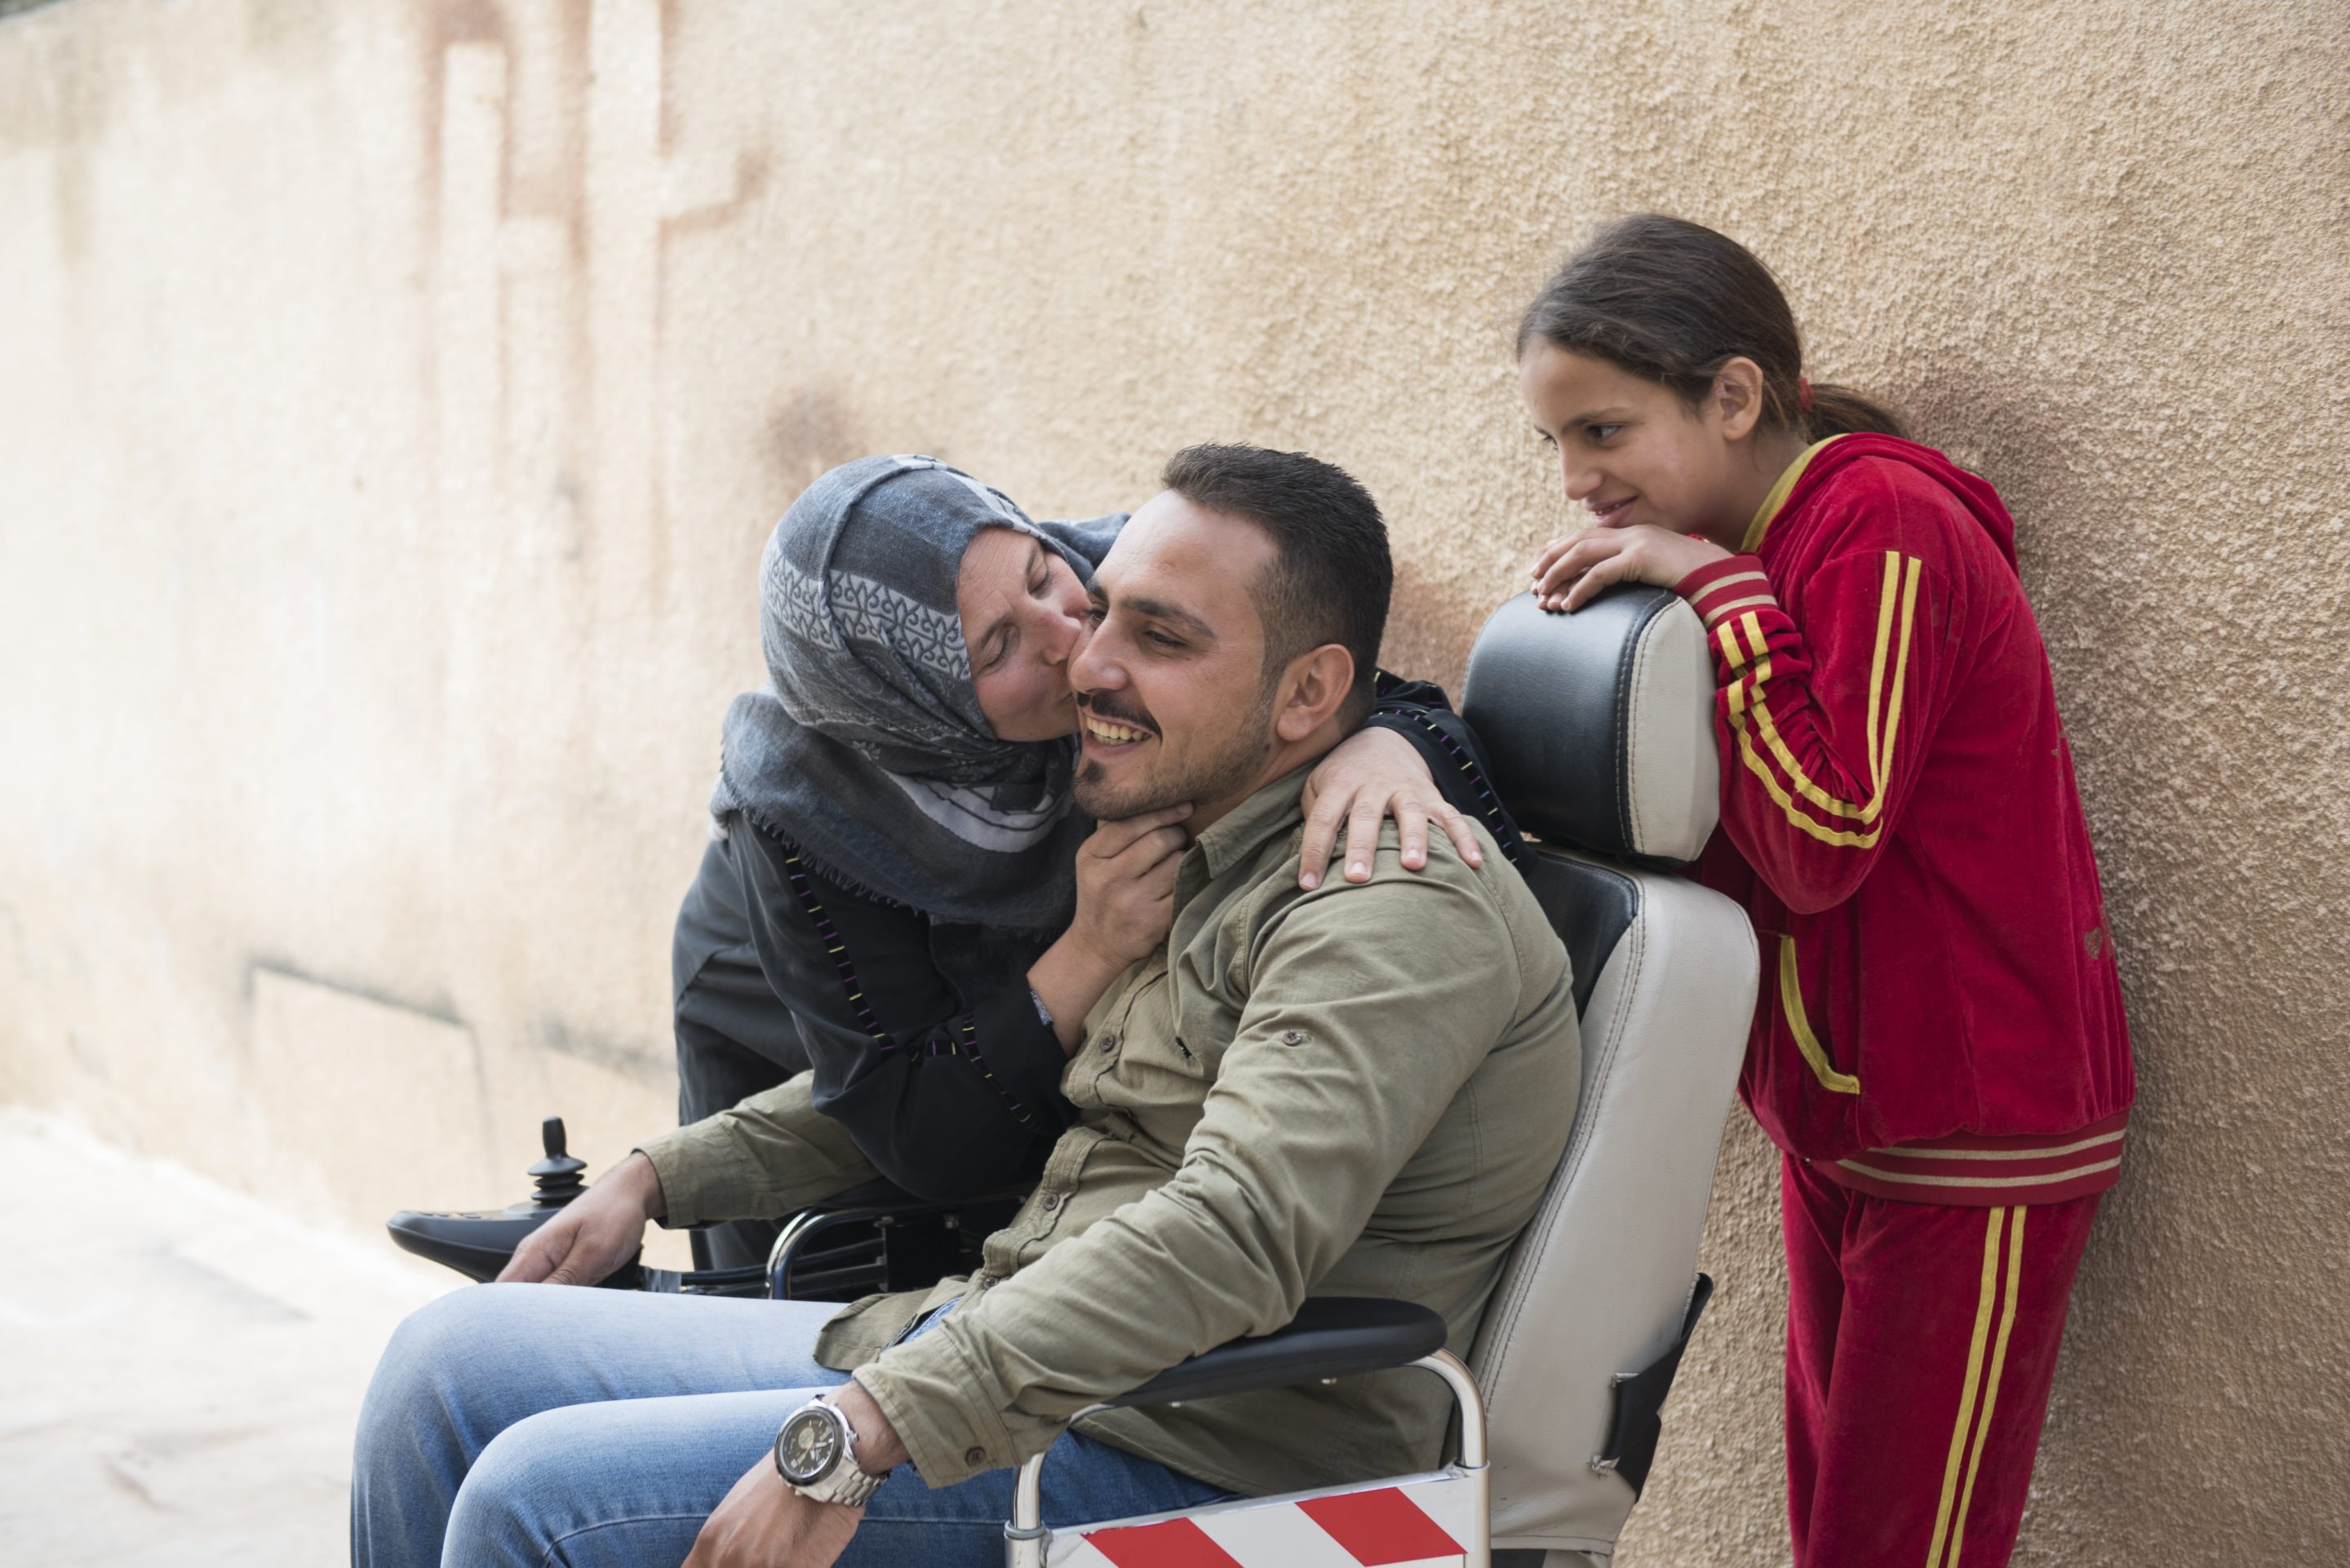 A woman gives a man in a wheelchair a kiss on the cheek while a young girl hangs off the back of the wheelchair